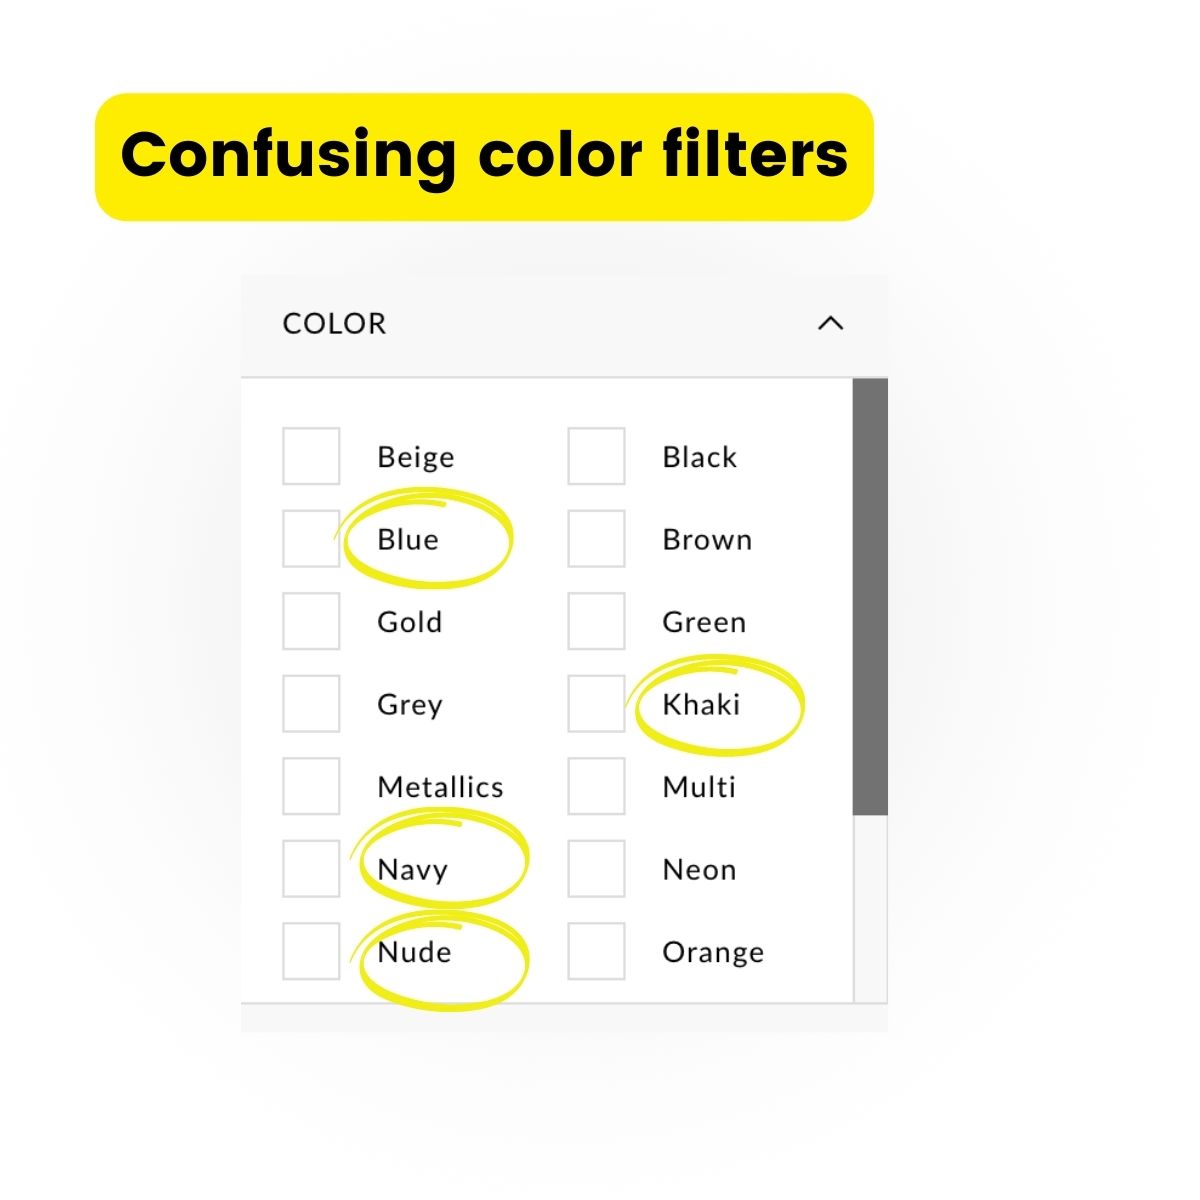 Confusing color filters for product filtering